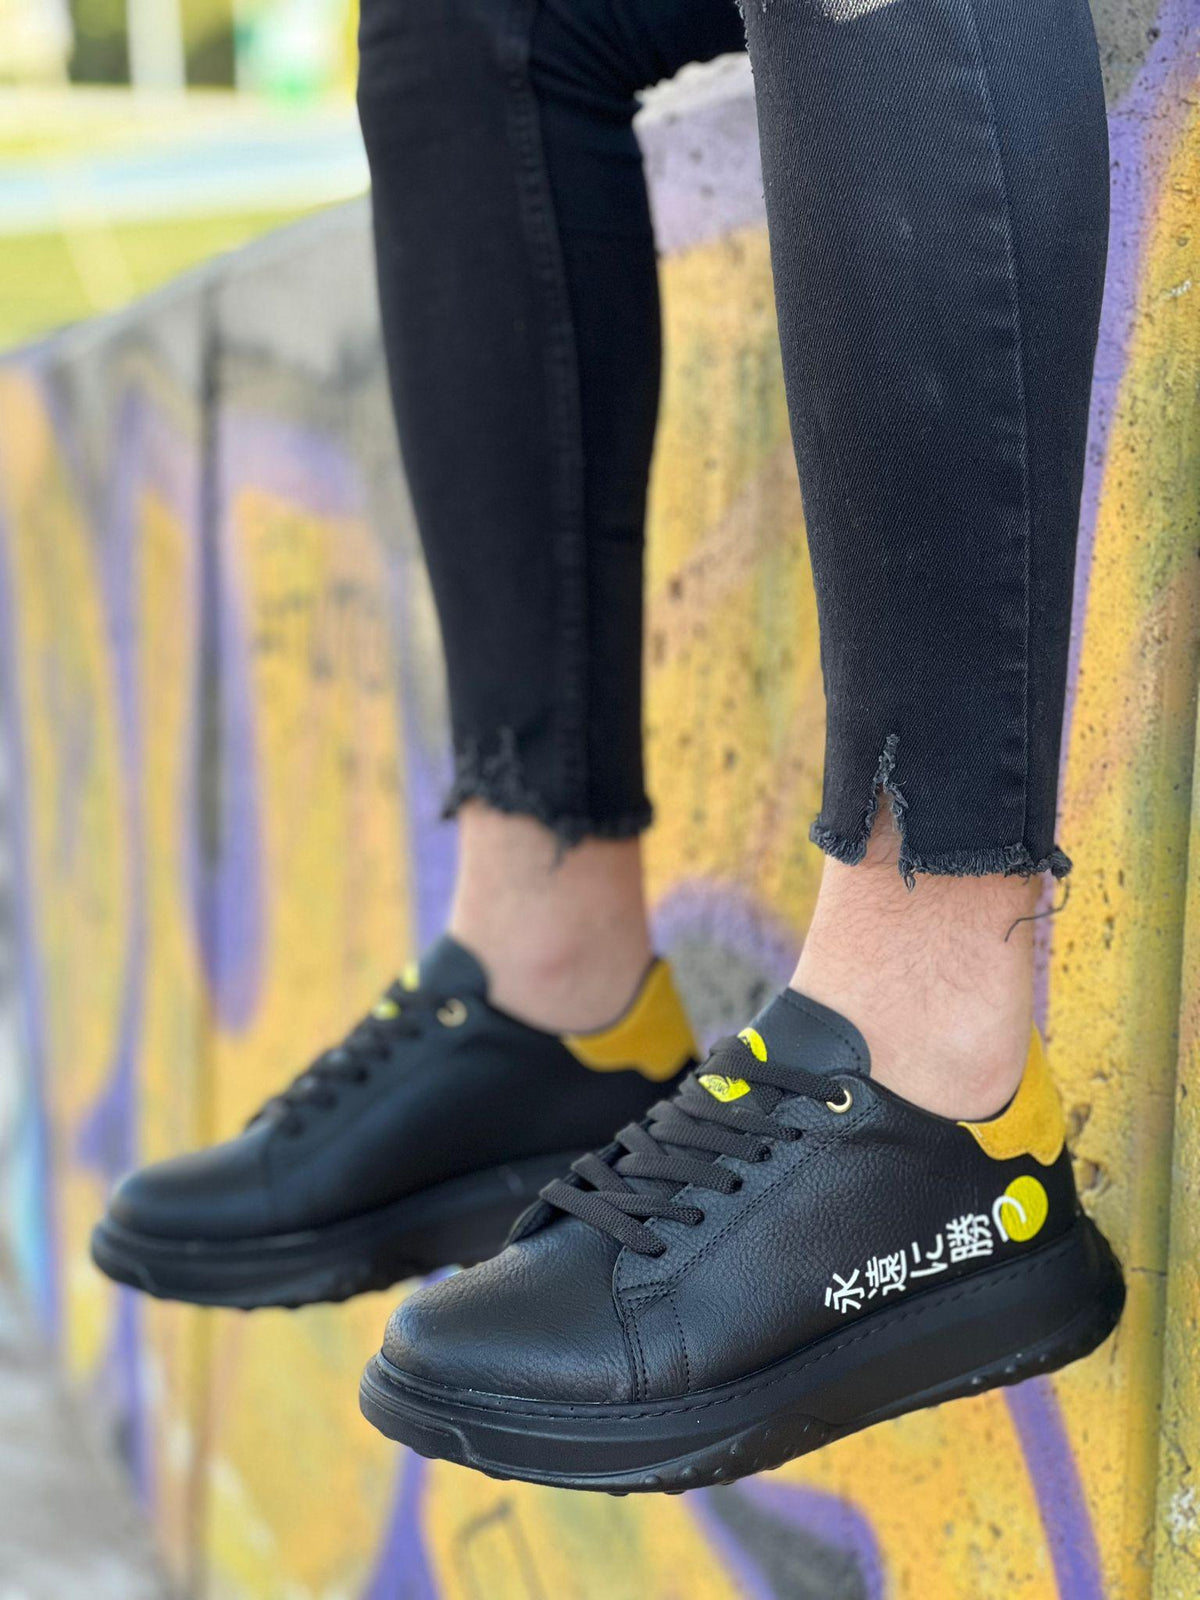 KB-172 Lace-up Charcoal Yellow Casual Men's Sneakers Shoes - STREET MODE ™